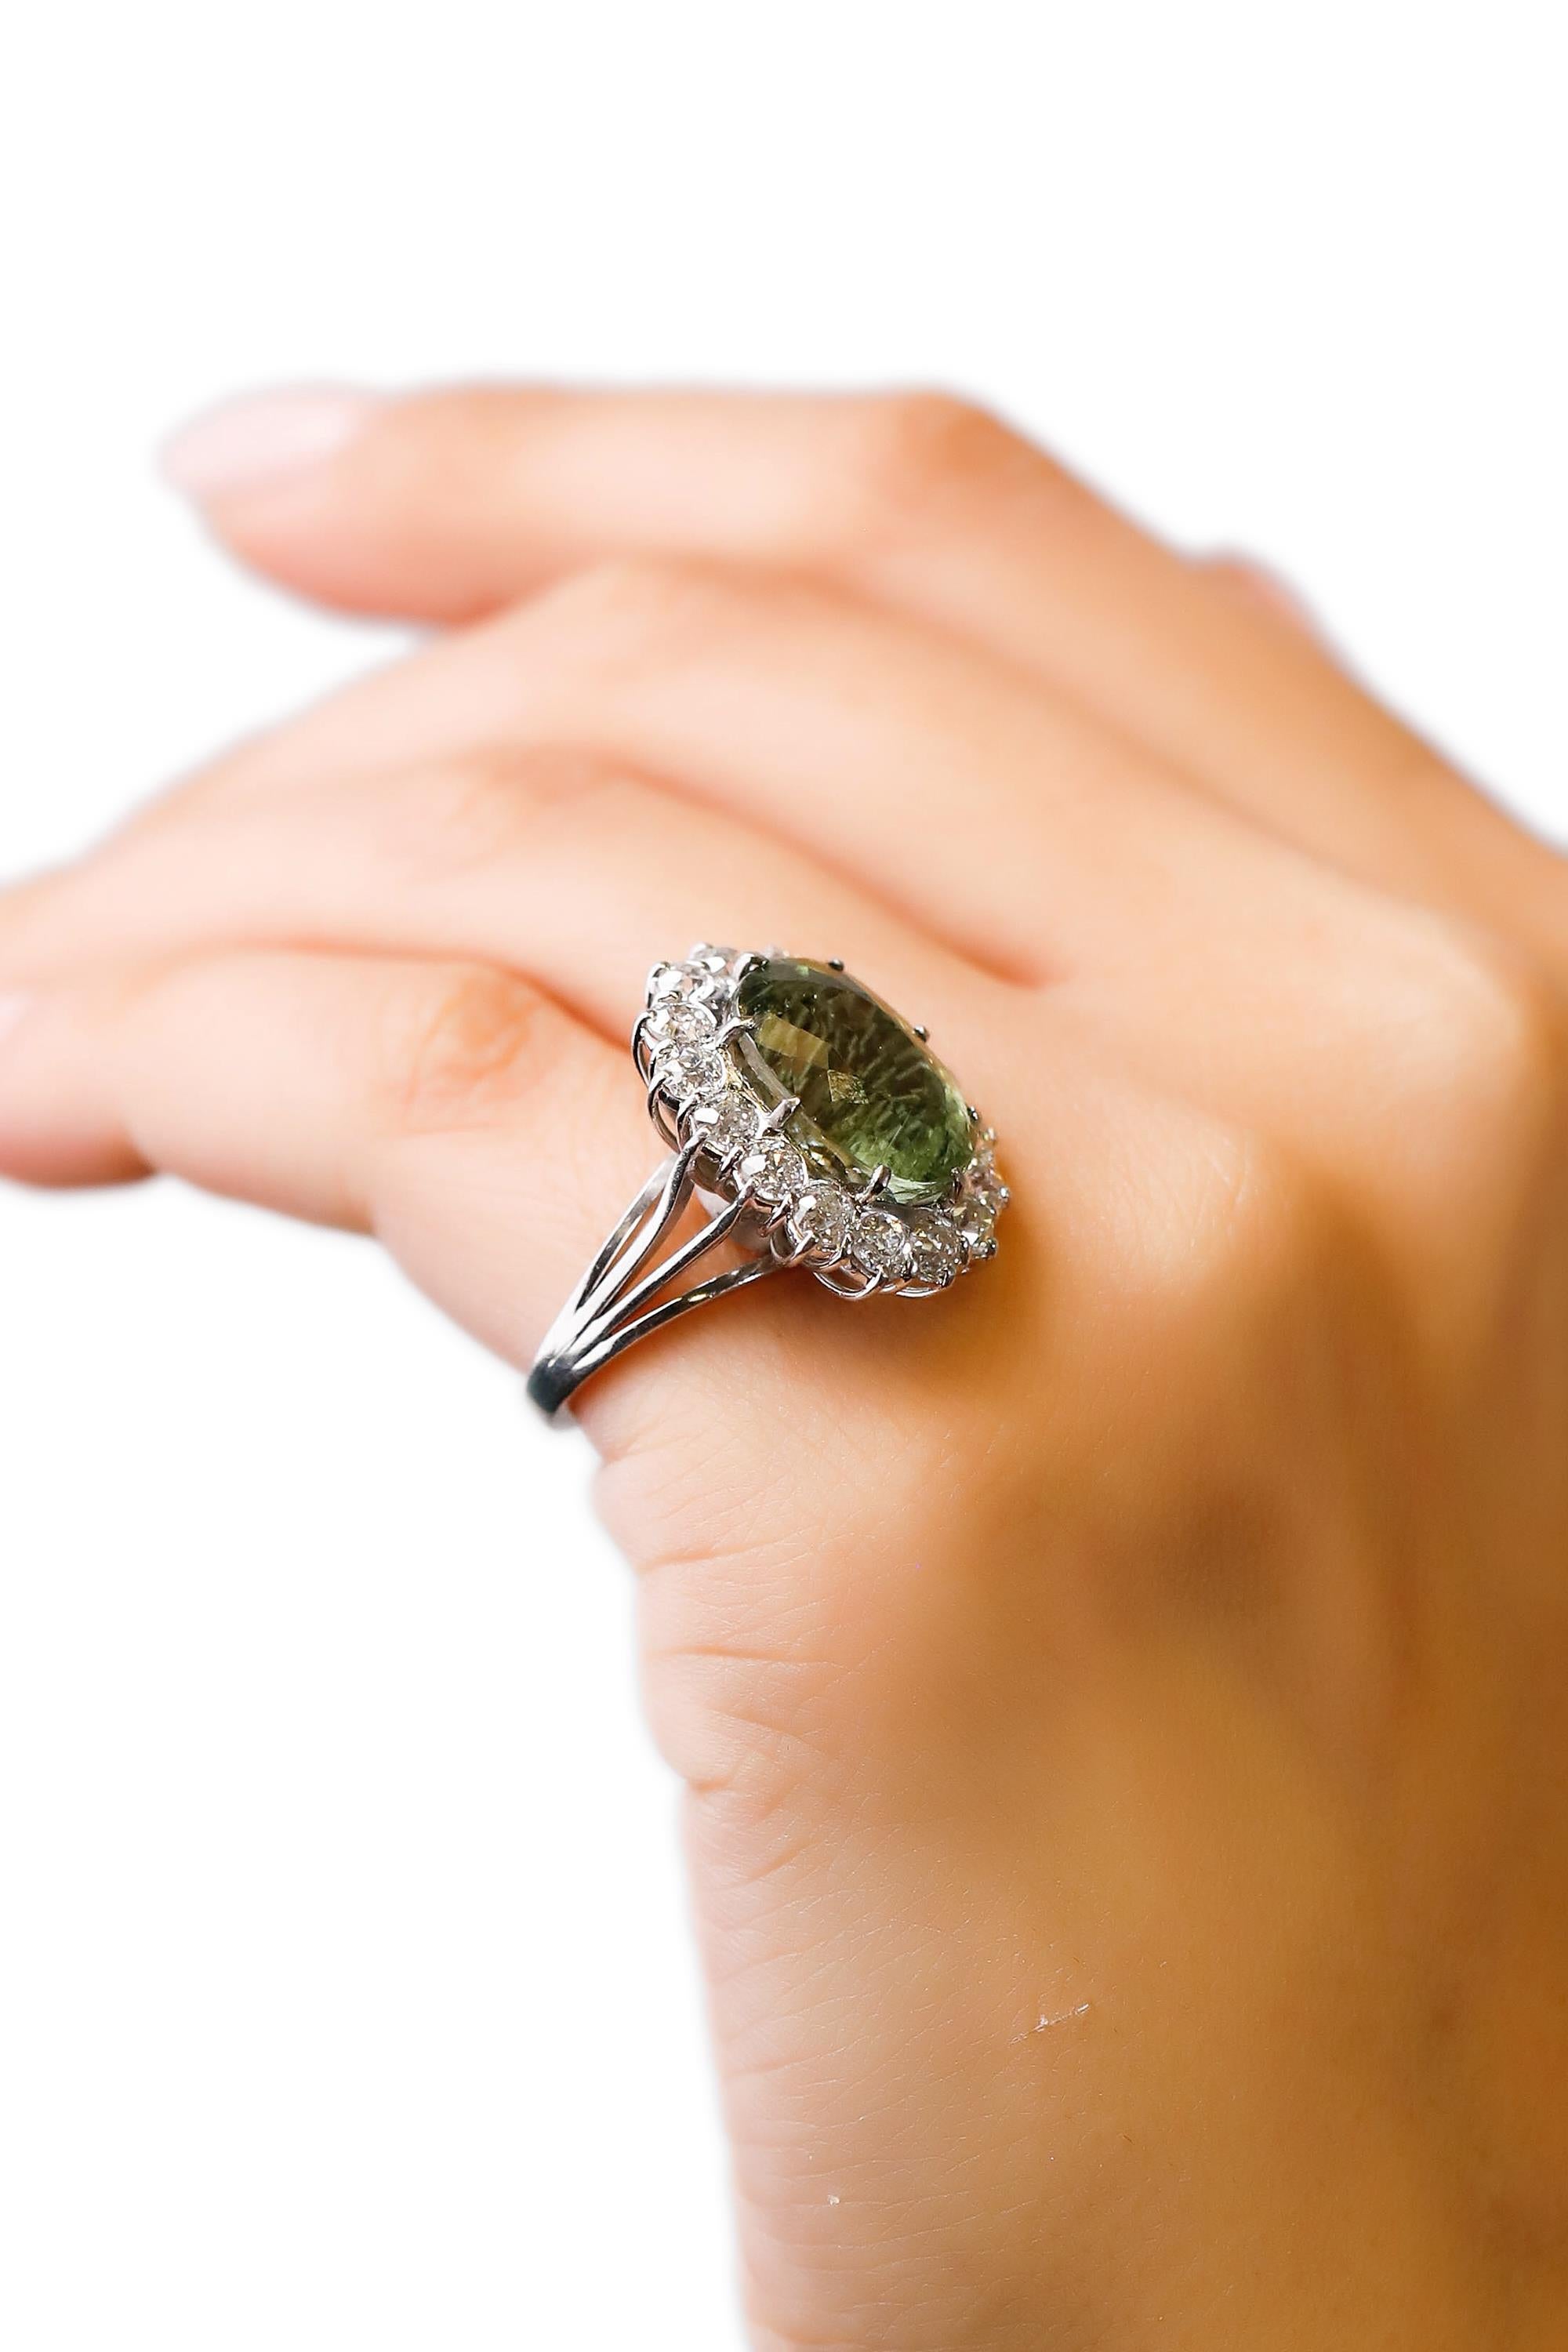 10 Carat Green Tourmaline and Diamond Ring Platinum Solitaire Cocktail Ring In Excellent Condition For Sale In New York, NY